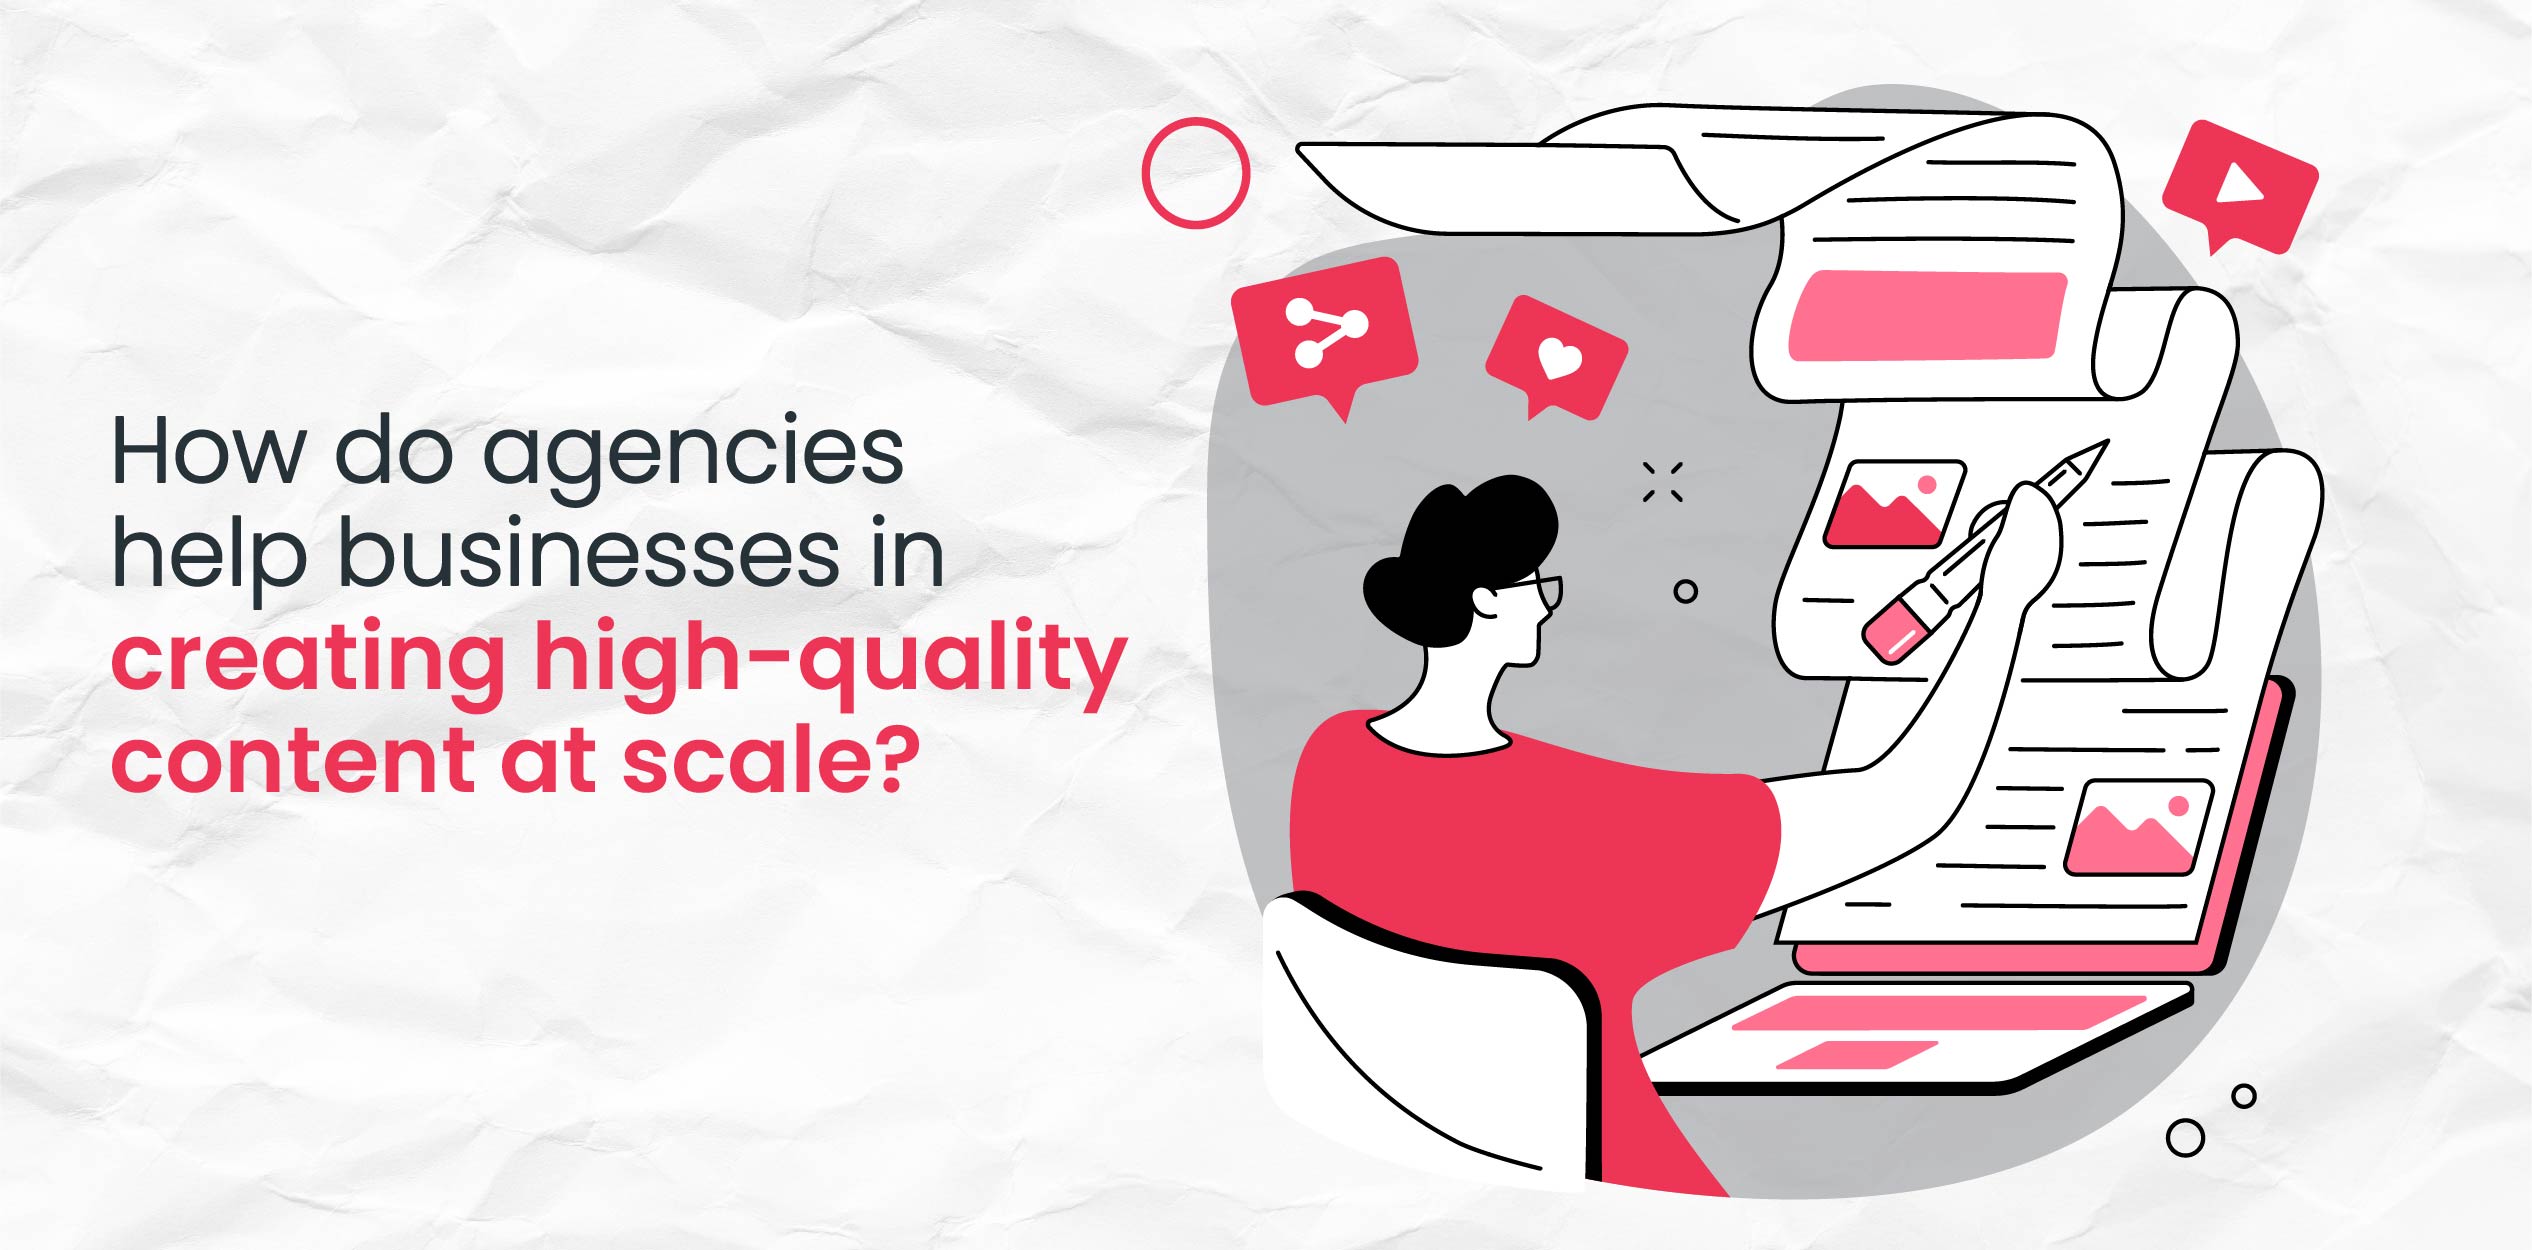 How do agencies help businesses in creating high-quality content at scale?